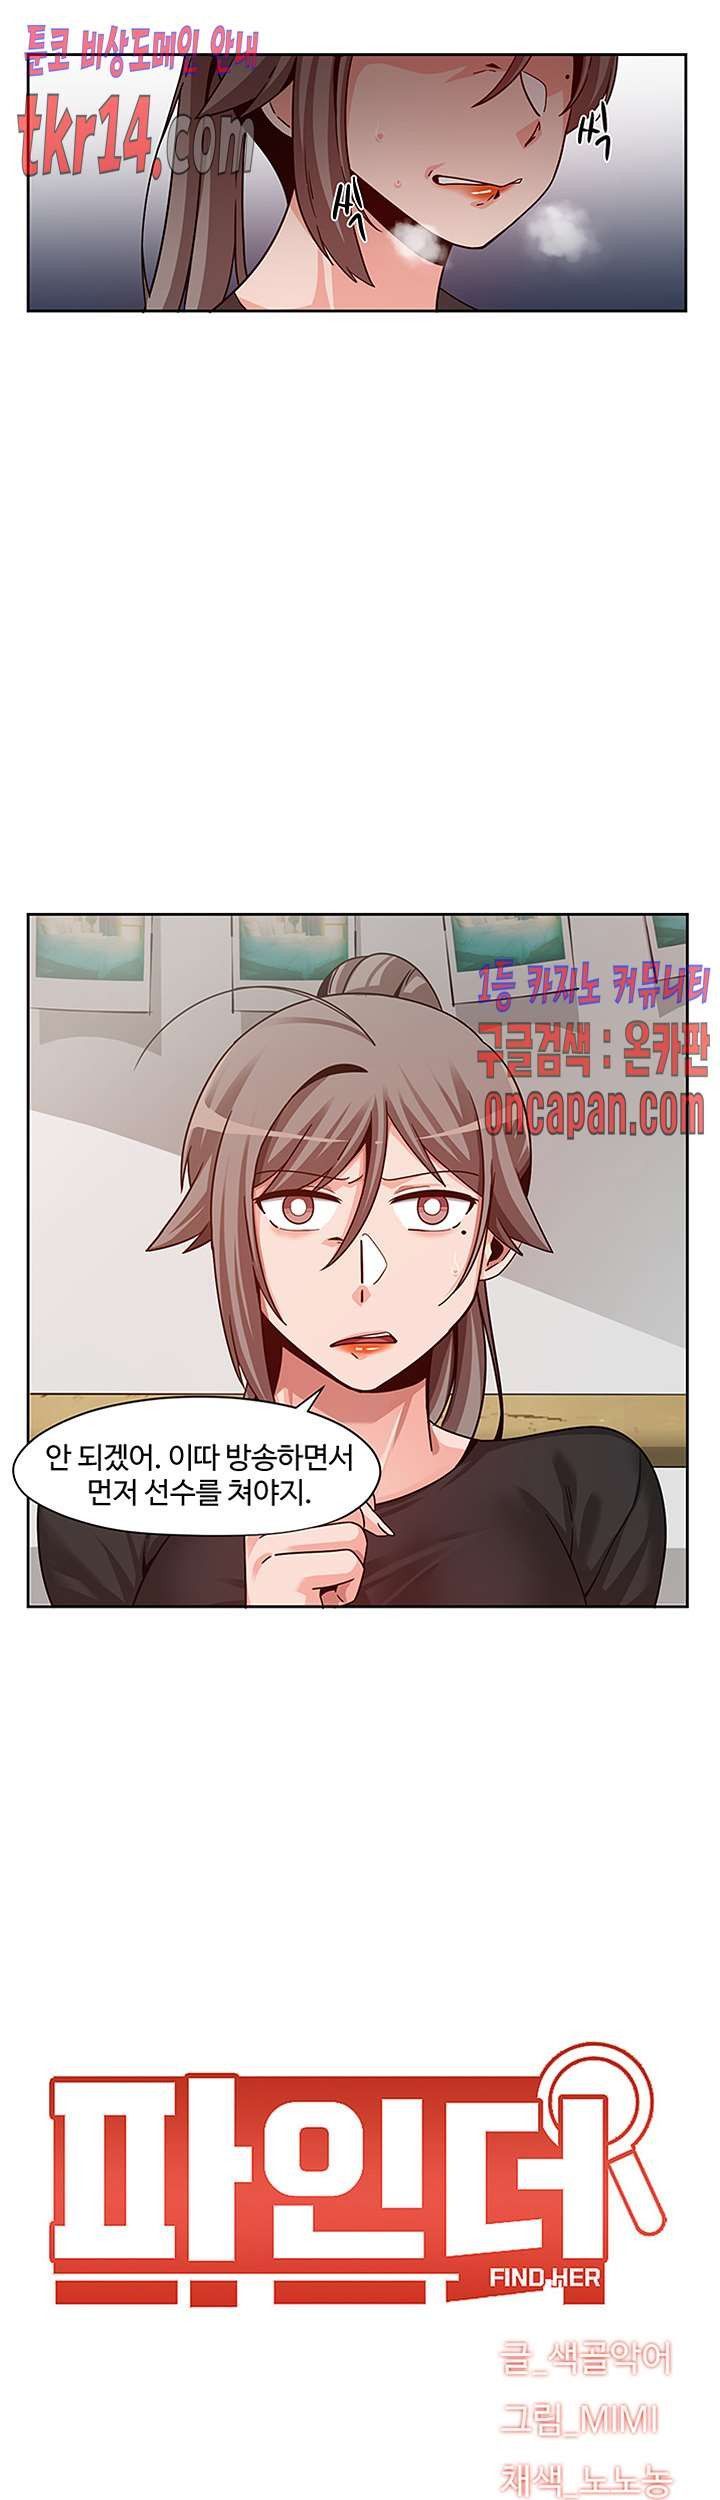 Findher Raw - Chapter 16 Page 6